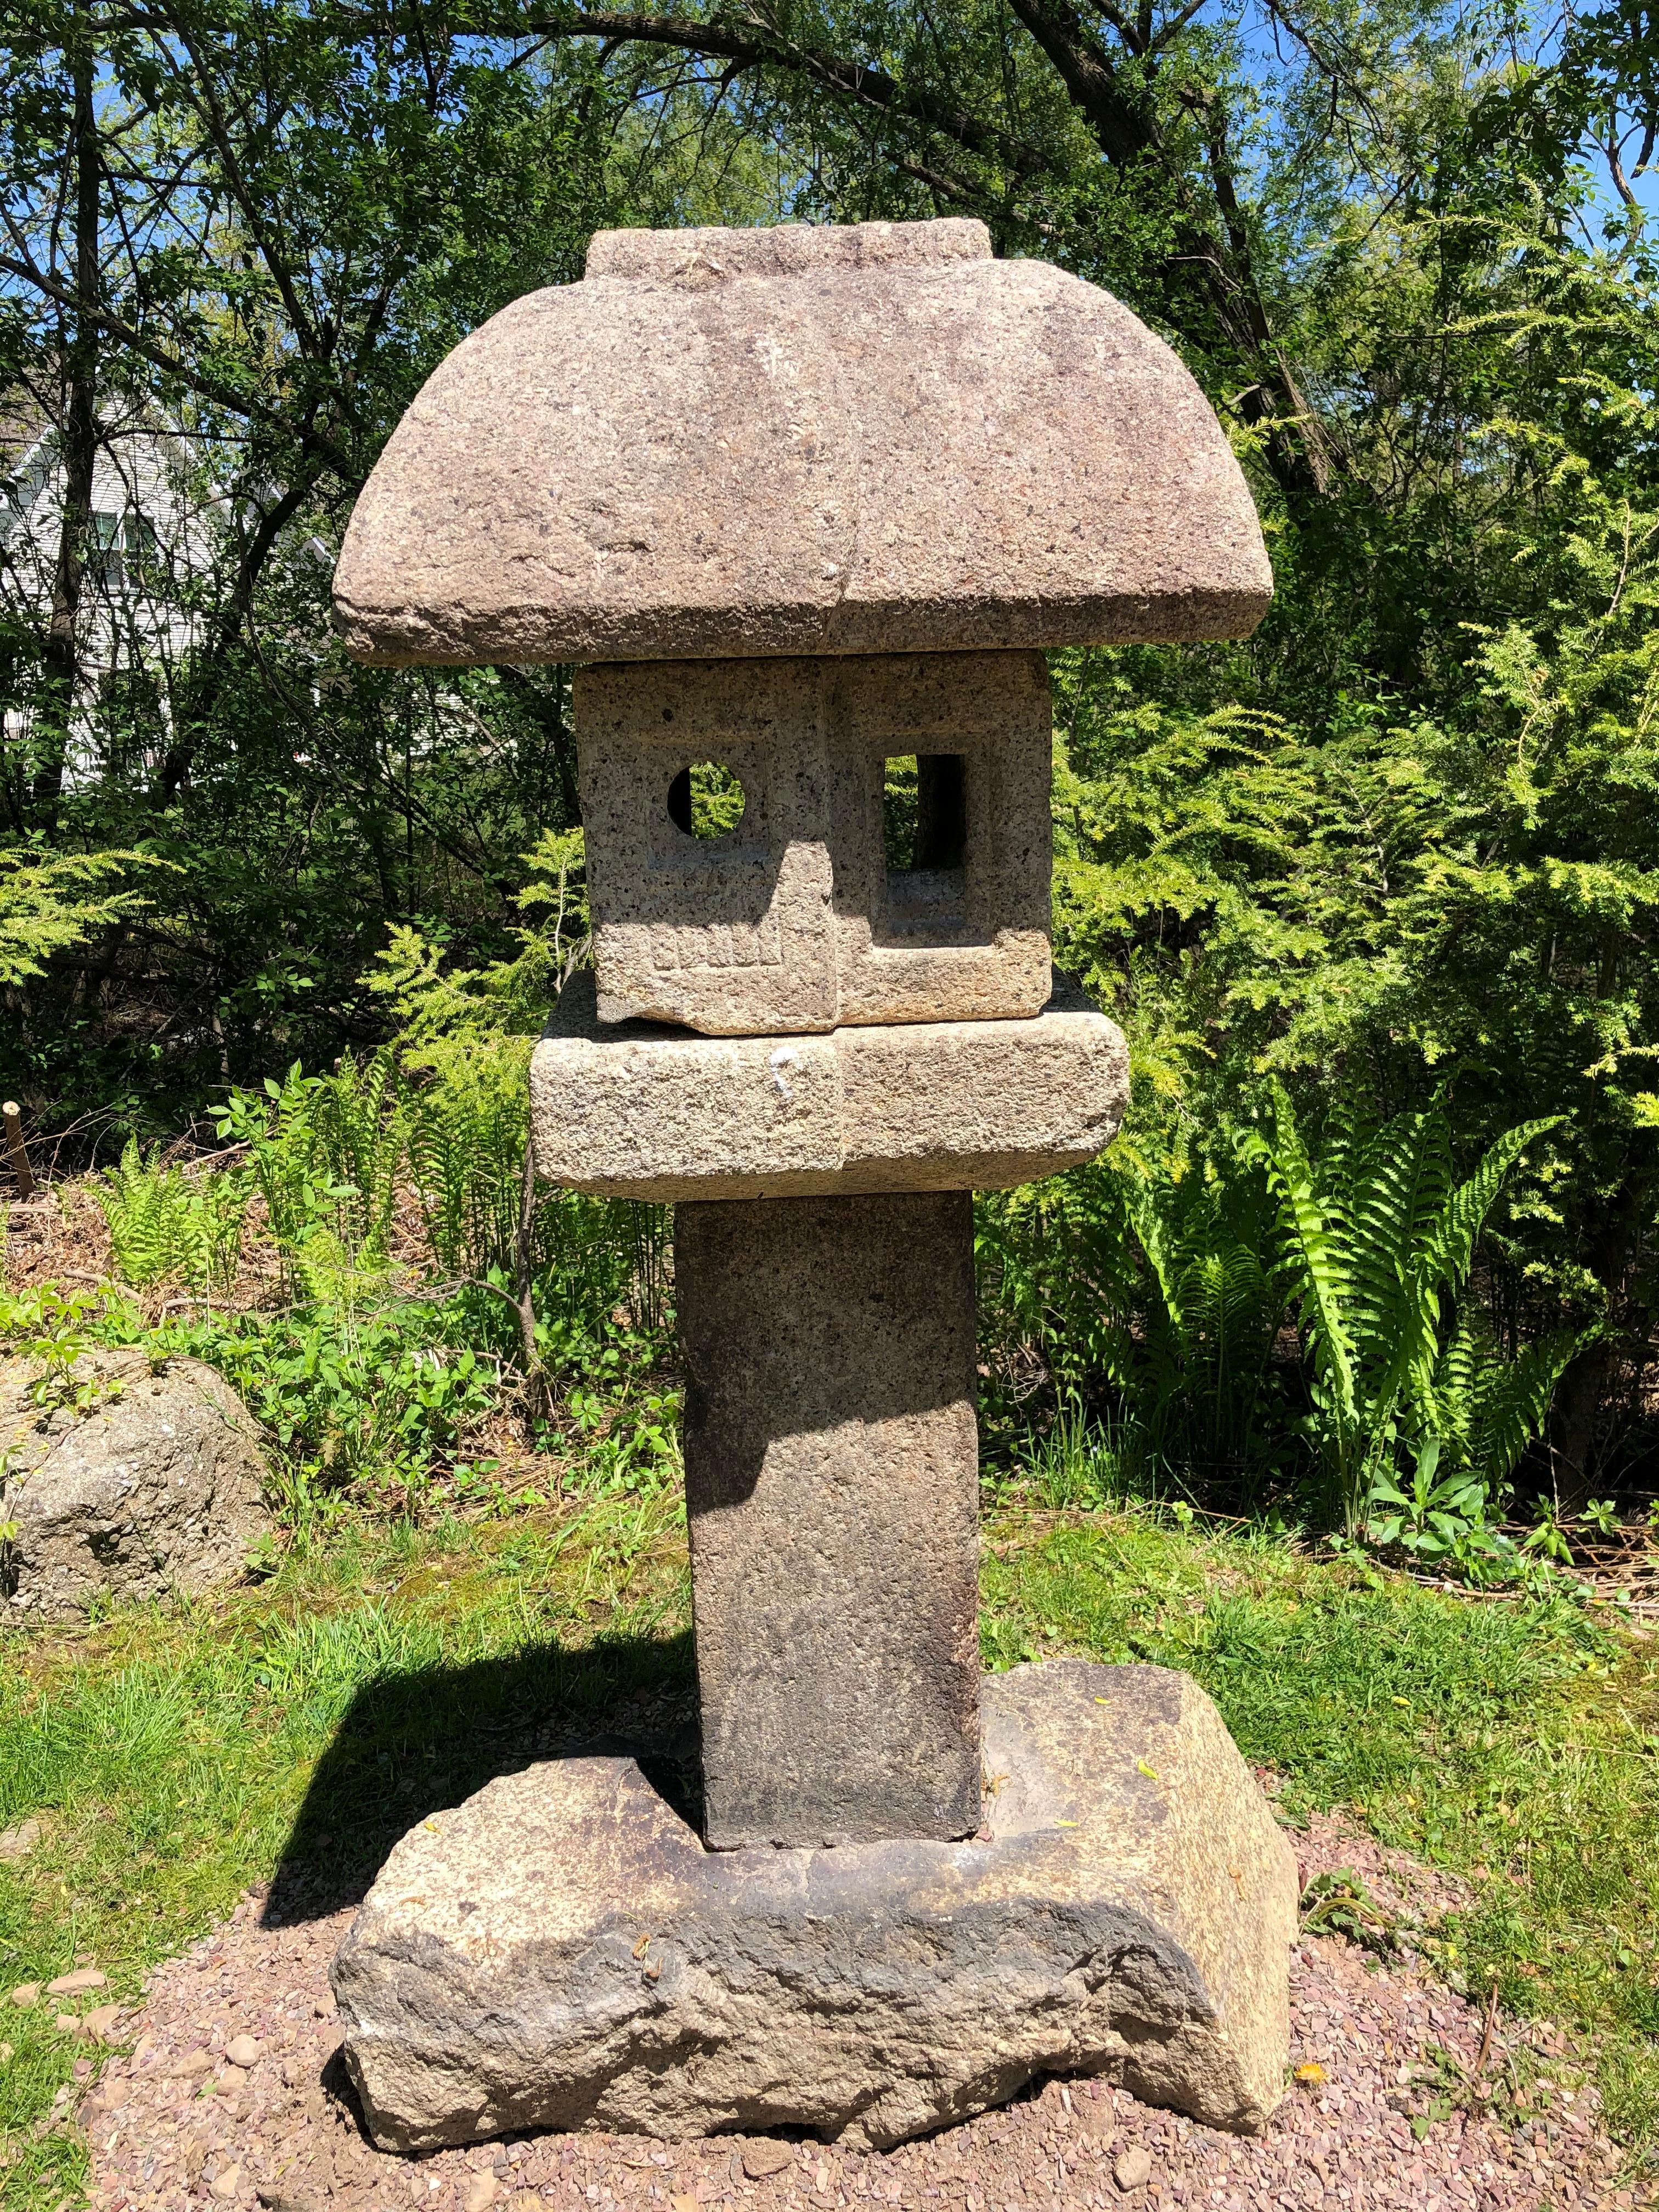 From our recent Japanese Acquisitions Travels- new discovery, one of the most elusive lanterns 

Here's a beautiful and unique way to accent your indoor or outdoor garden space with this treasure from Japan!

This is a tall five piece carving in